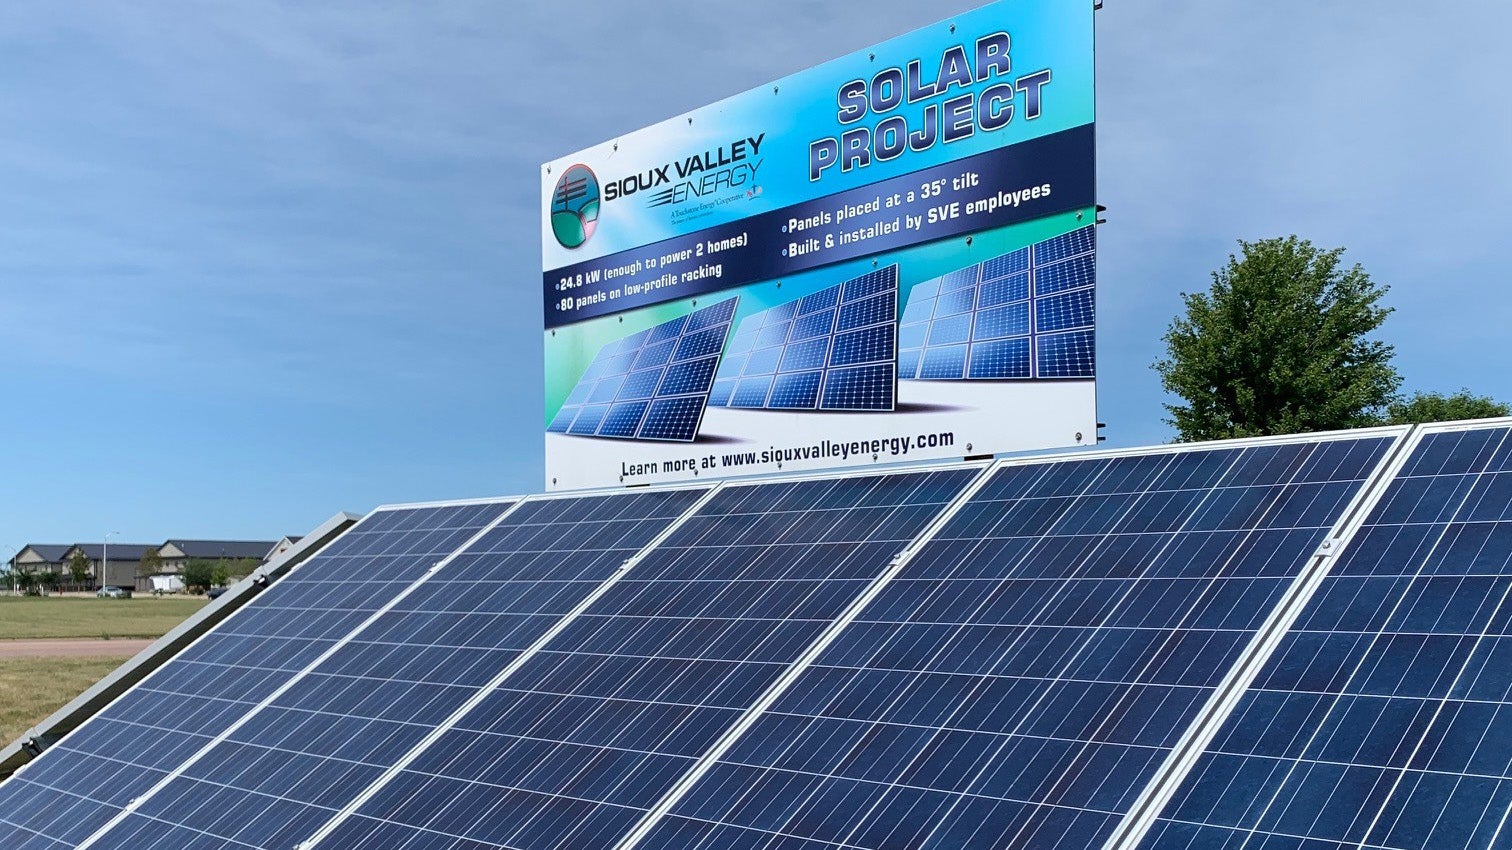 sve-solar-projects-sioux-valley-energy